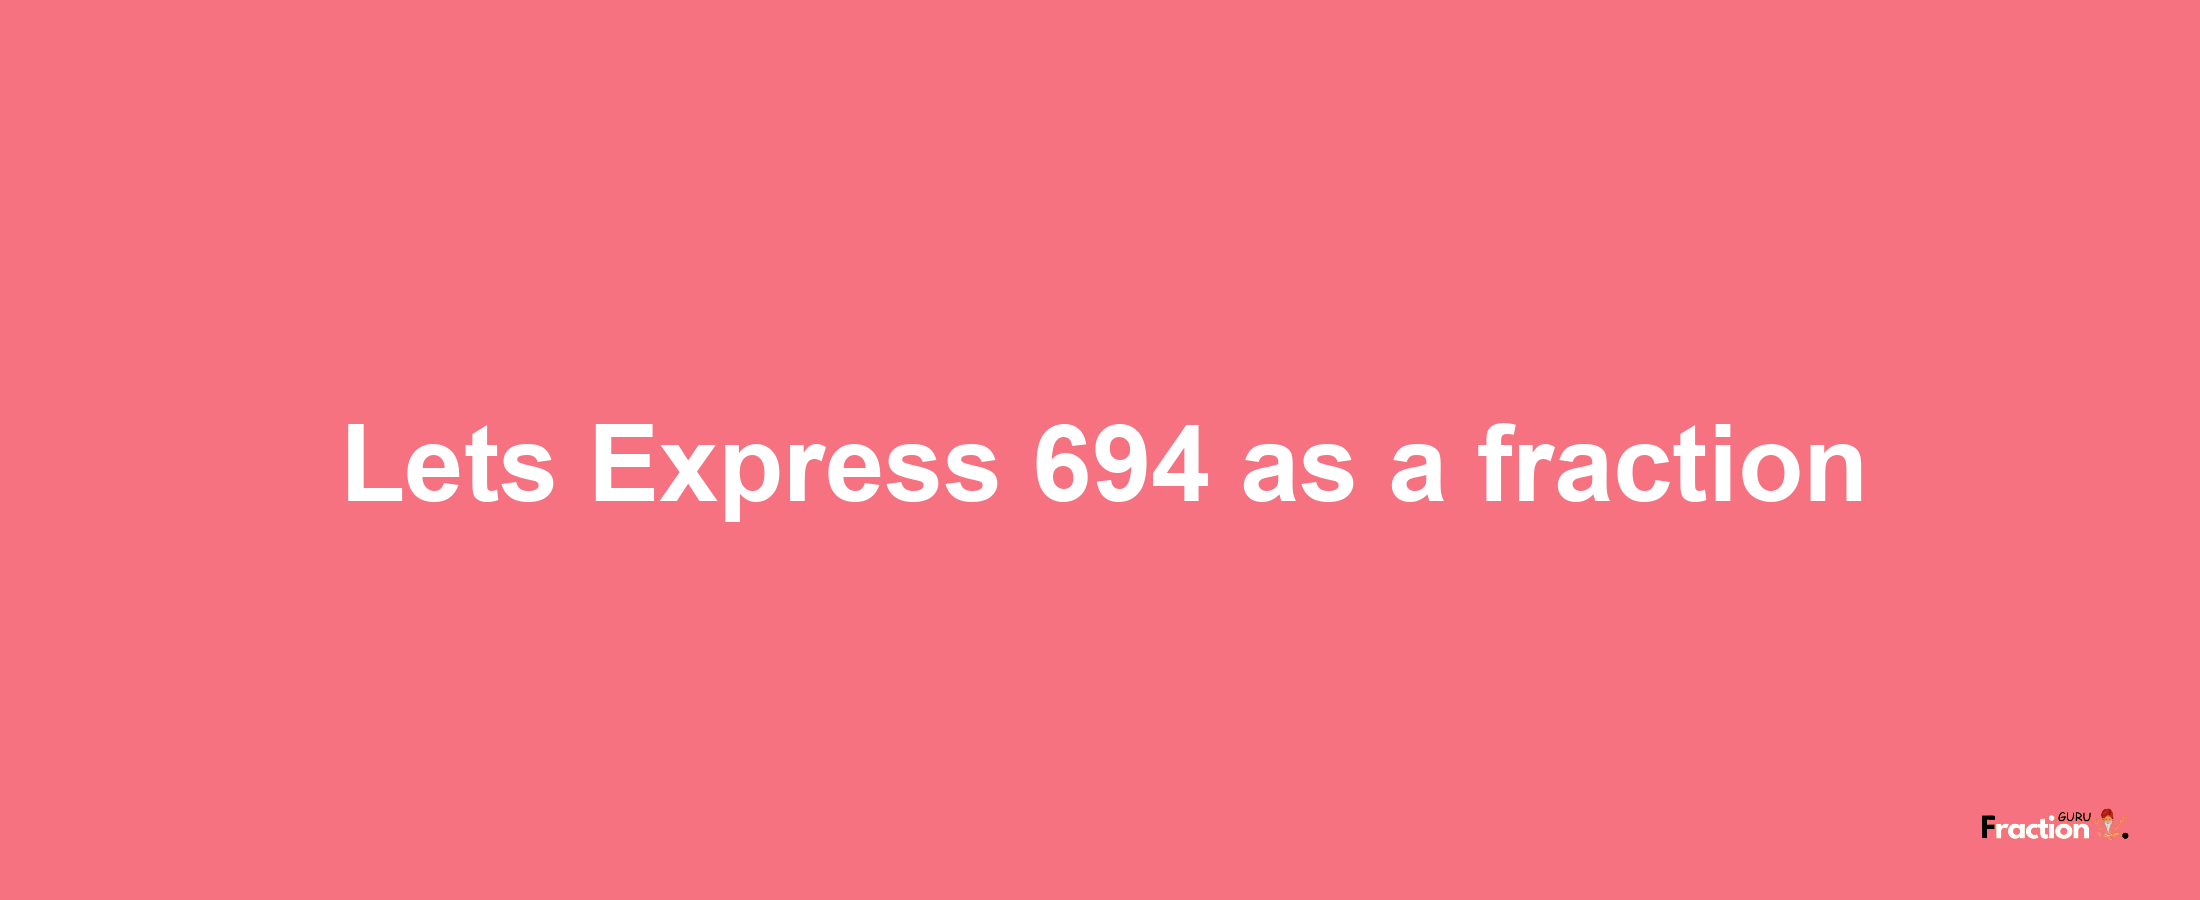 Lets Express 694 as afraction